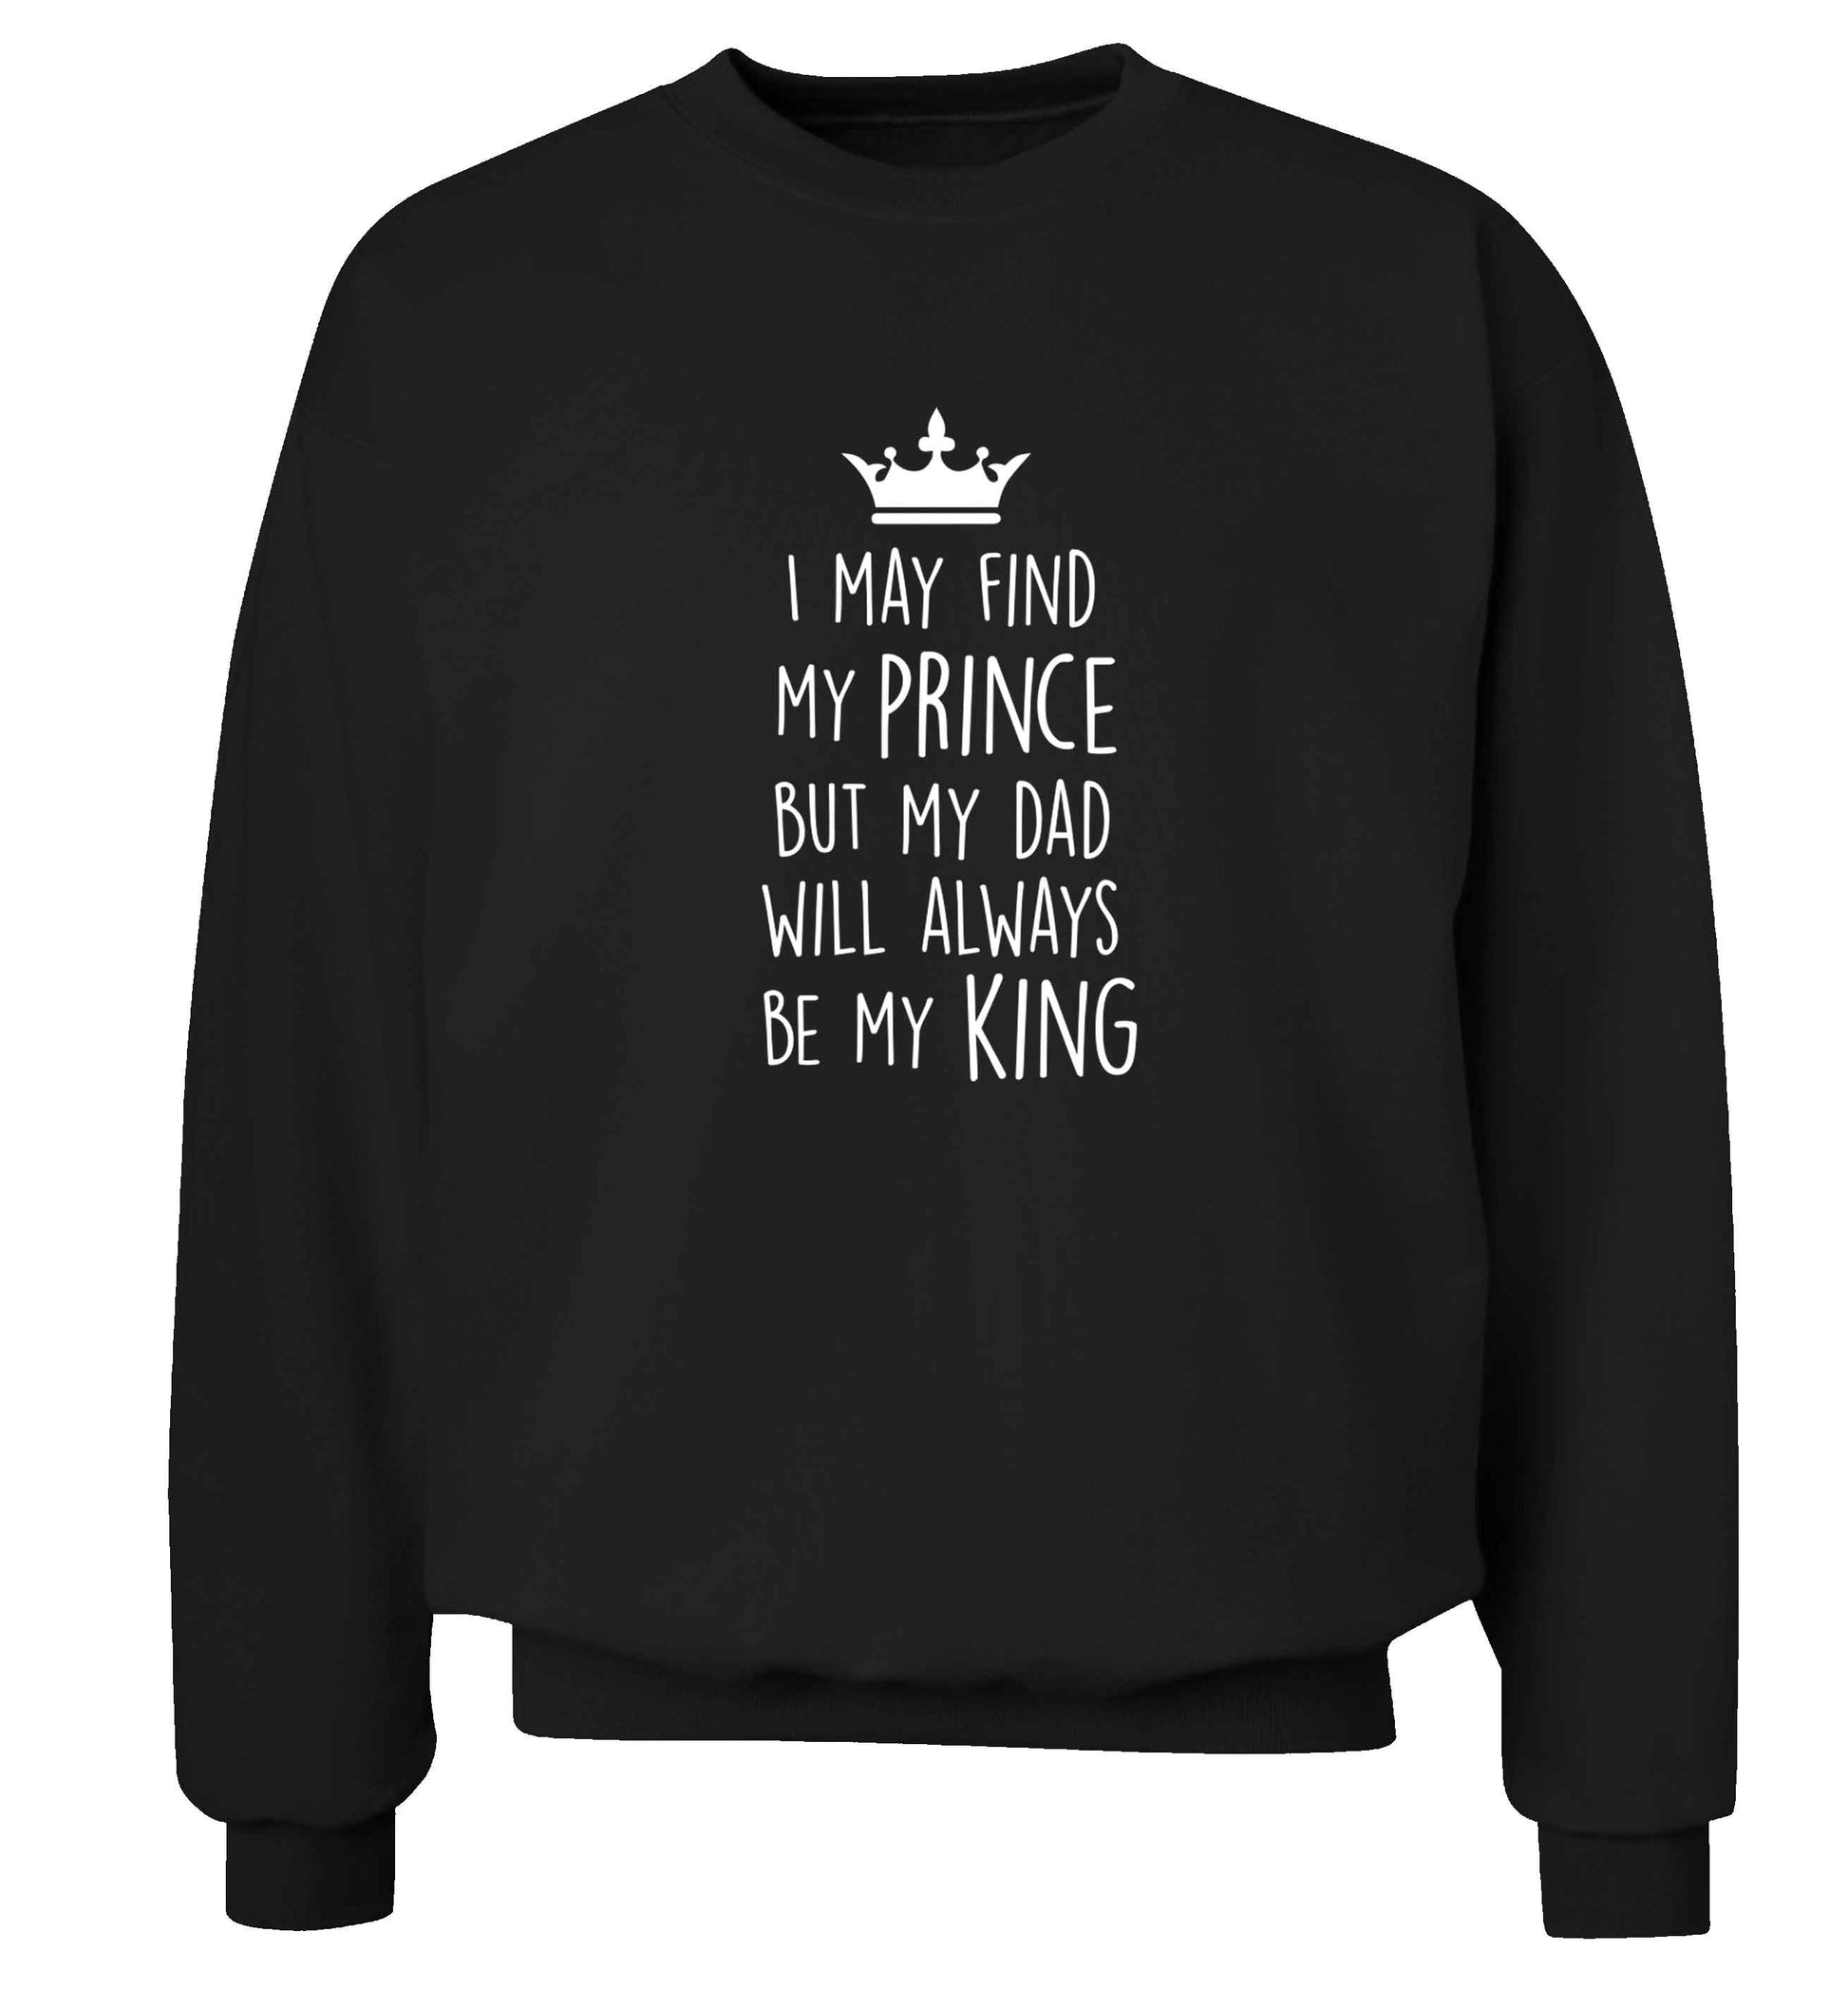 I may find my prince but my dad will always be my king adult's unisex black sweater 2XL